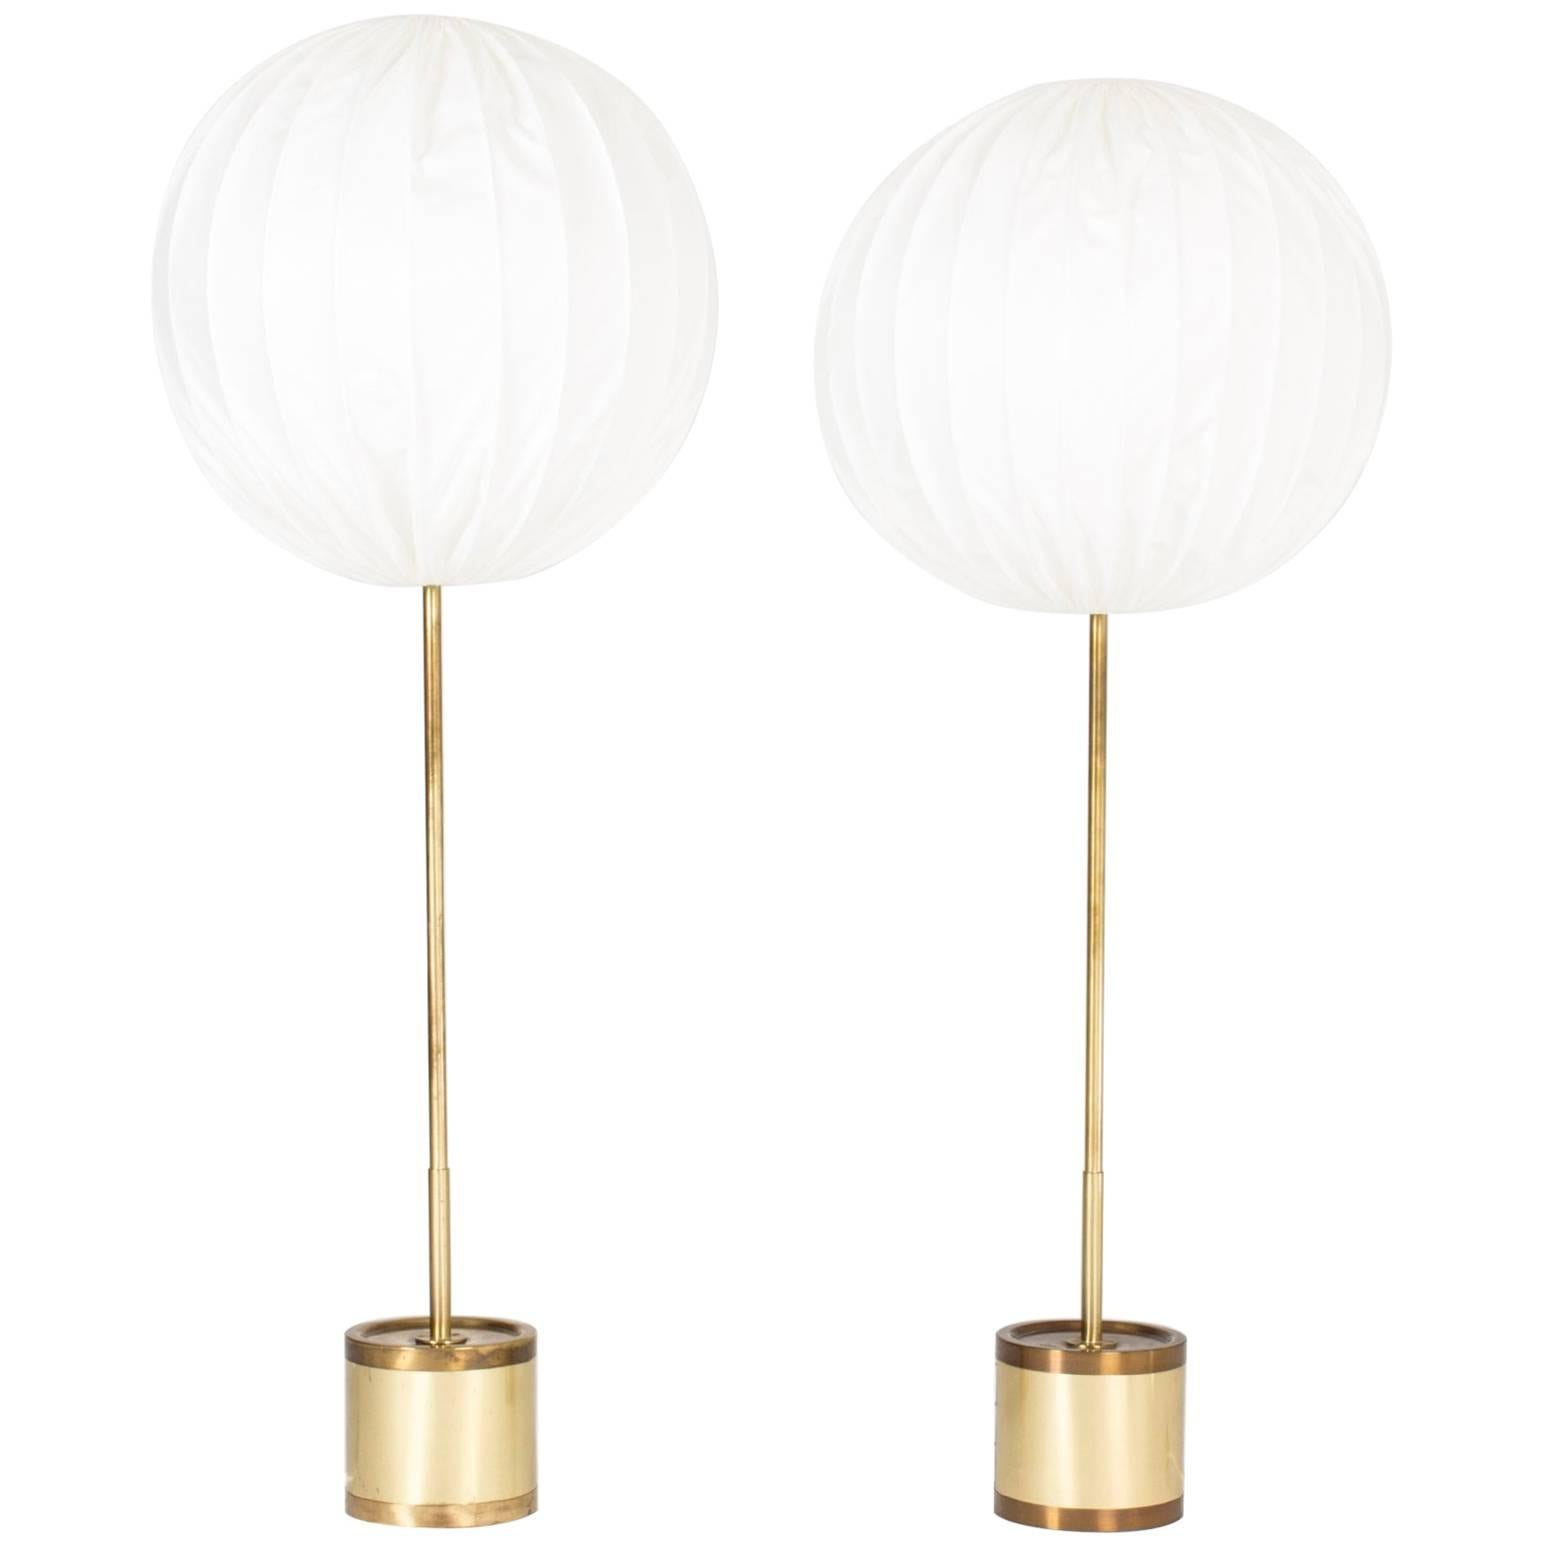 Pair of Brass Floor Lamps by Hans-Agne Jakobsson